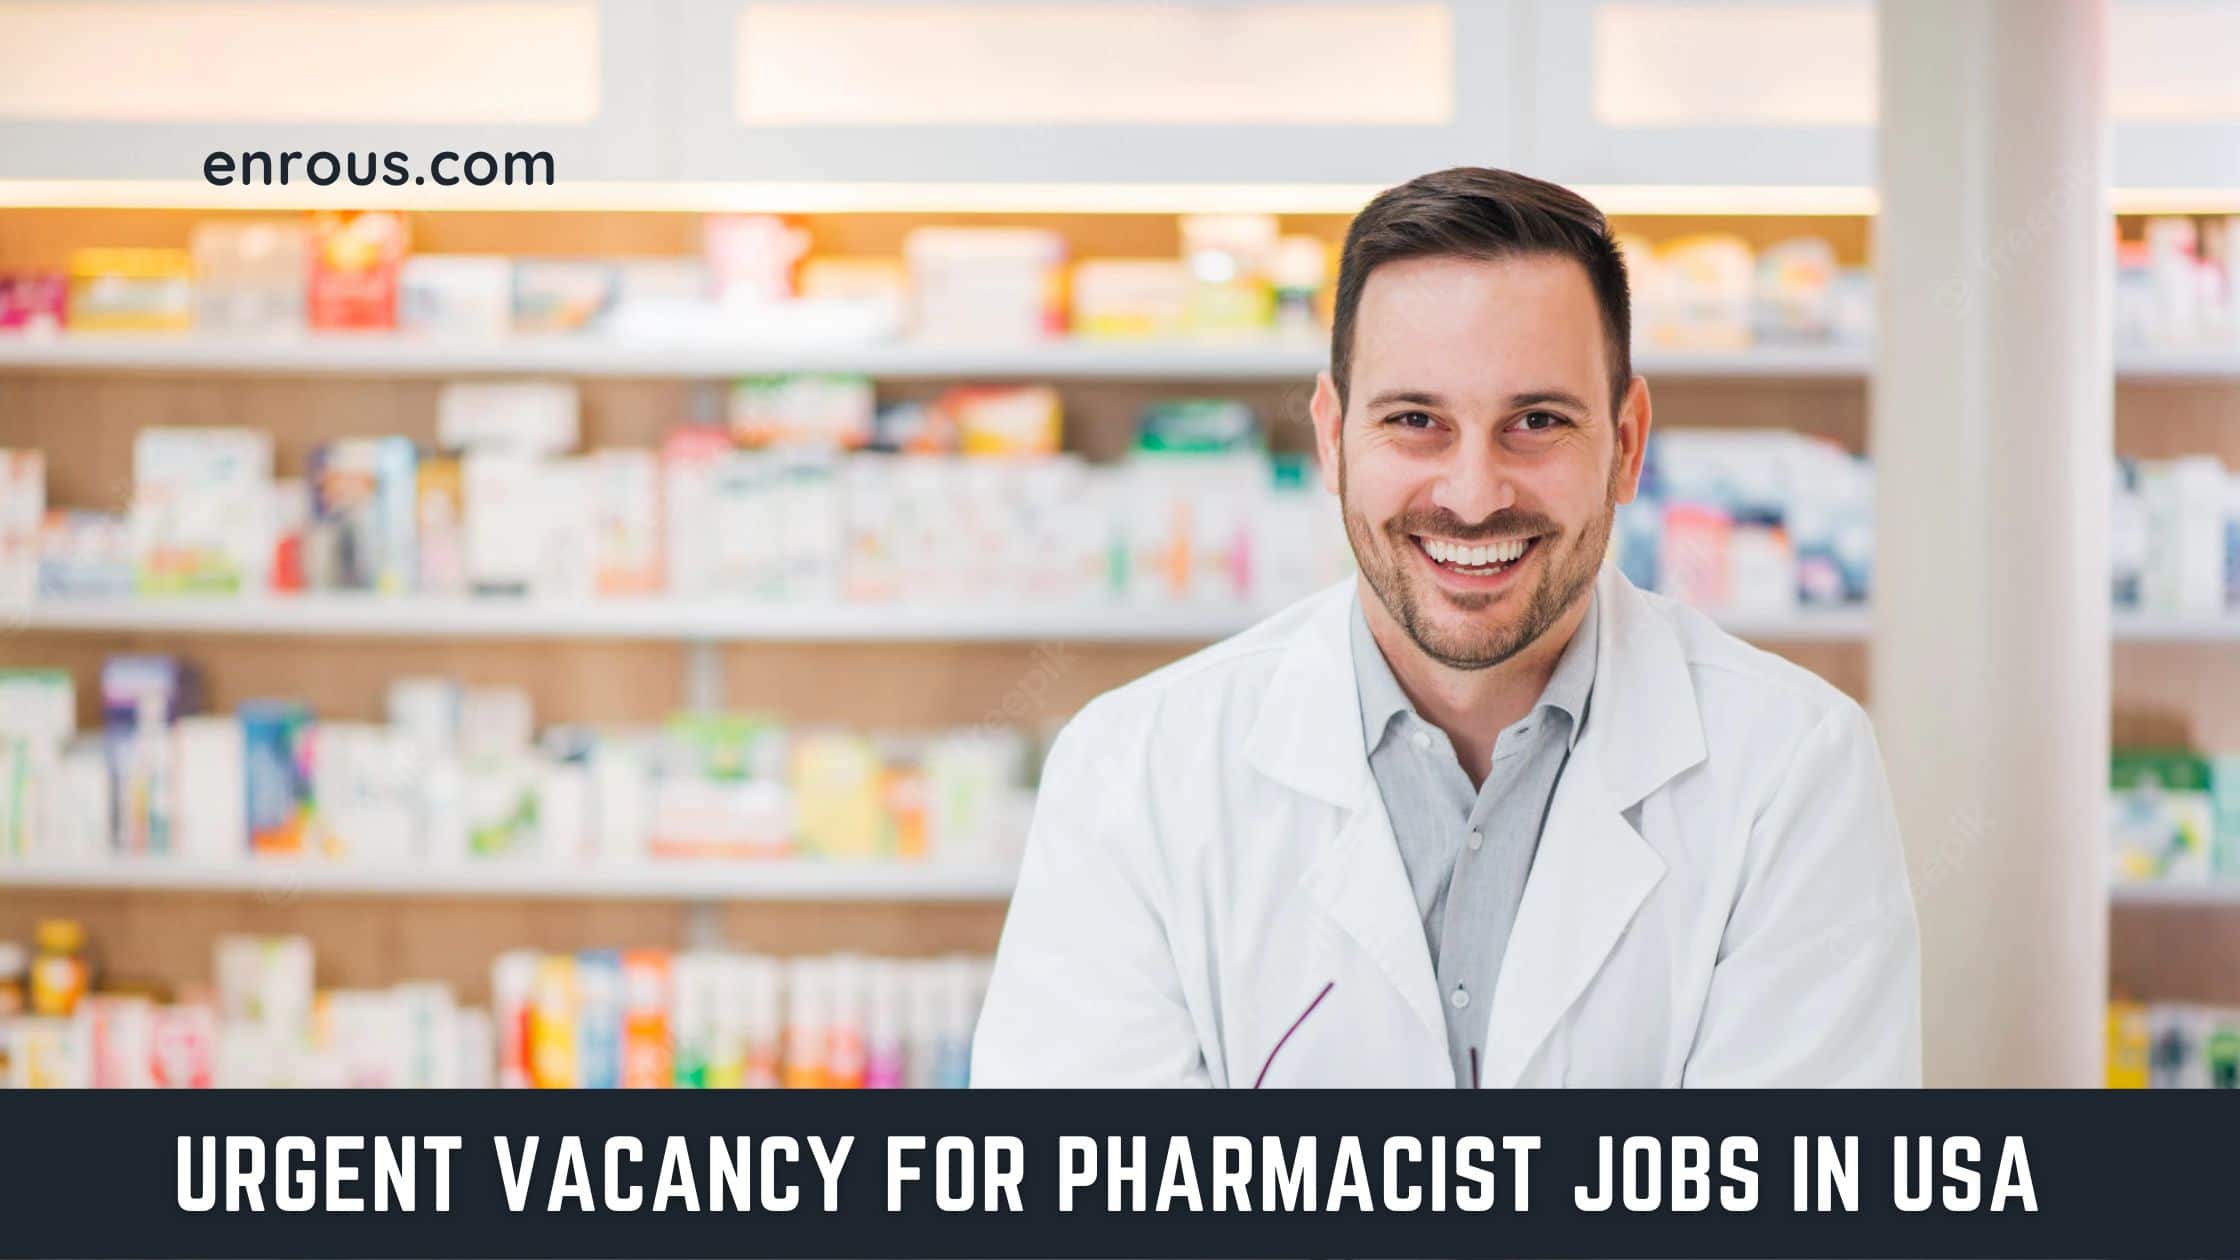 Urgent Vacancy For Pharmacist Jobs in USA